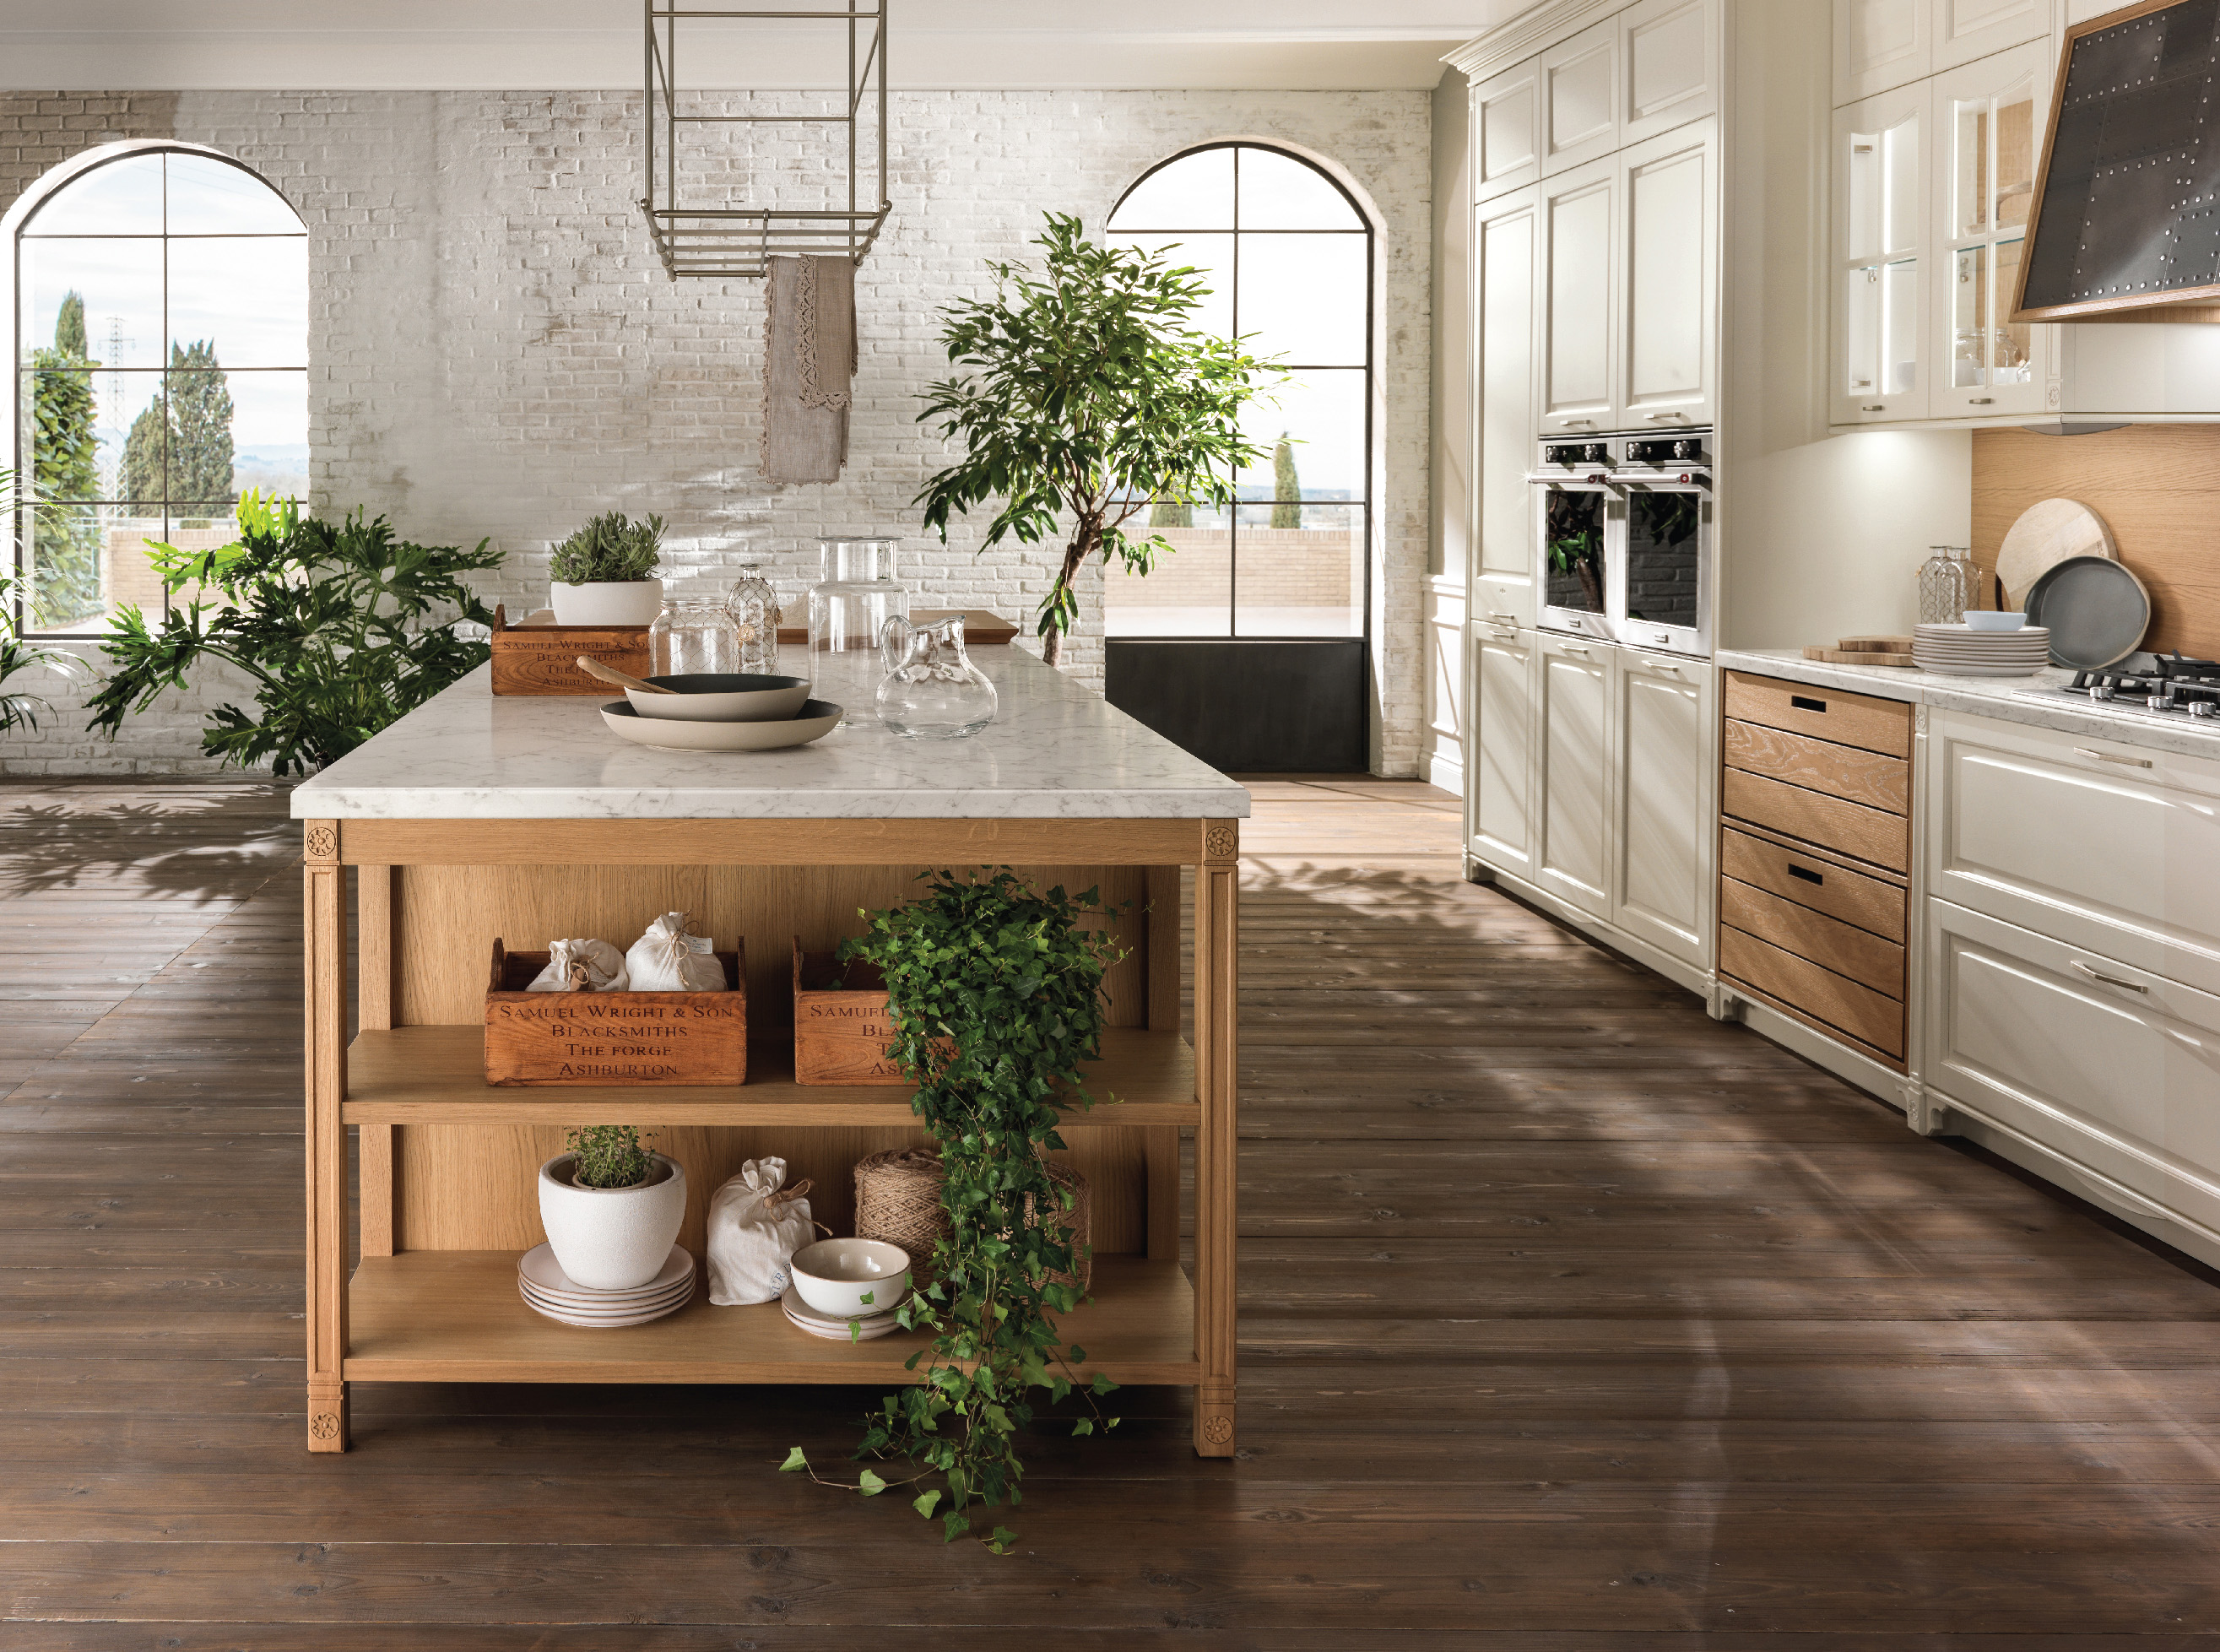 What Are the Advantages of a Kitchen Remodeling? - The Architects Diary